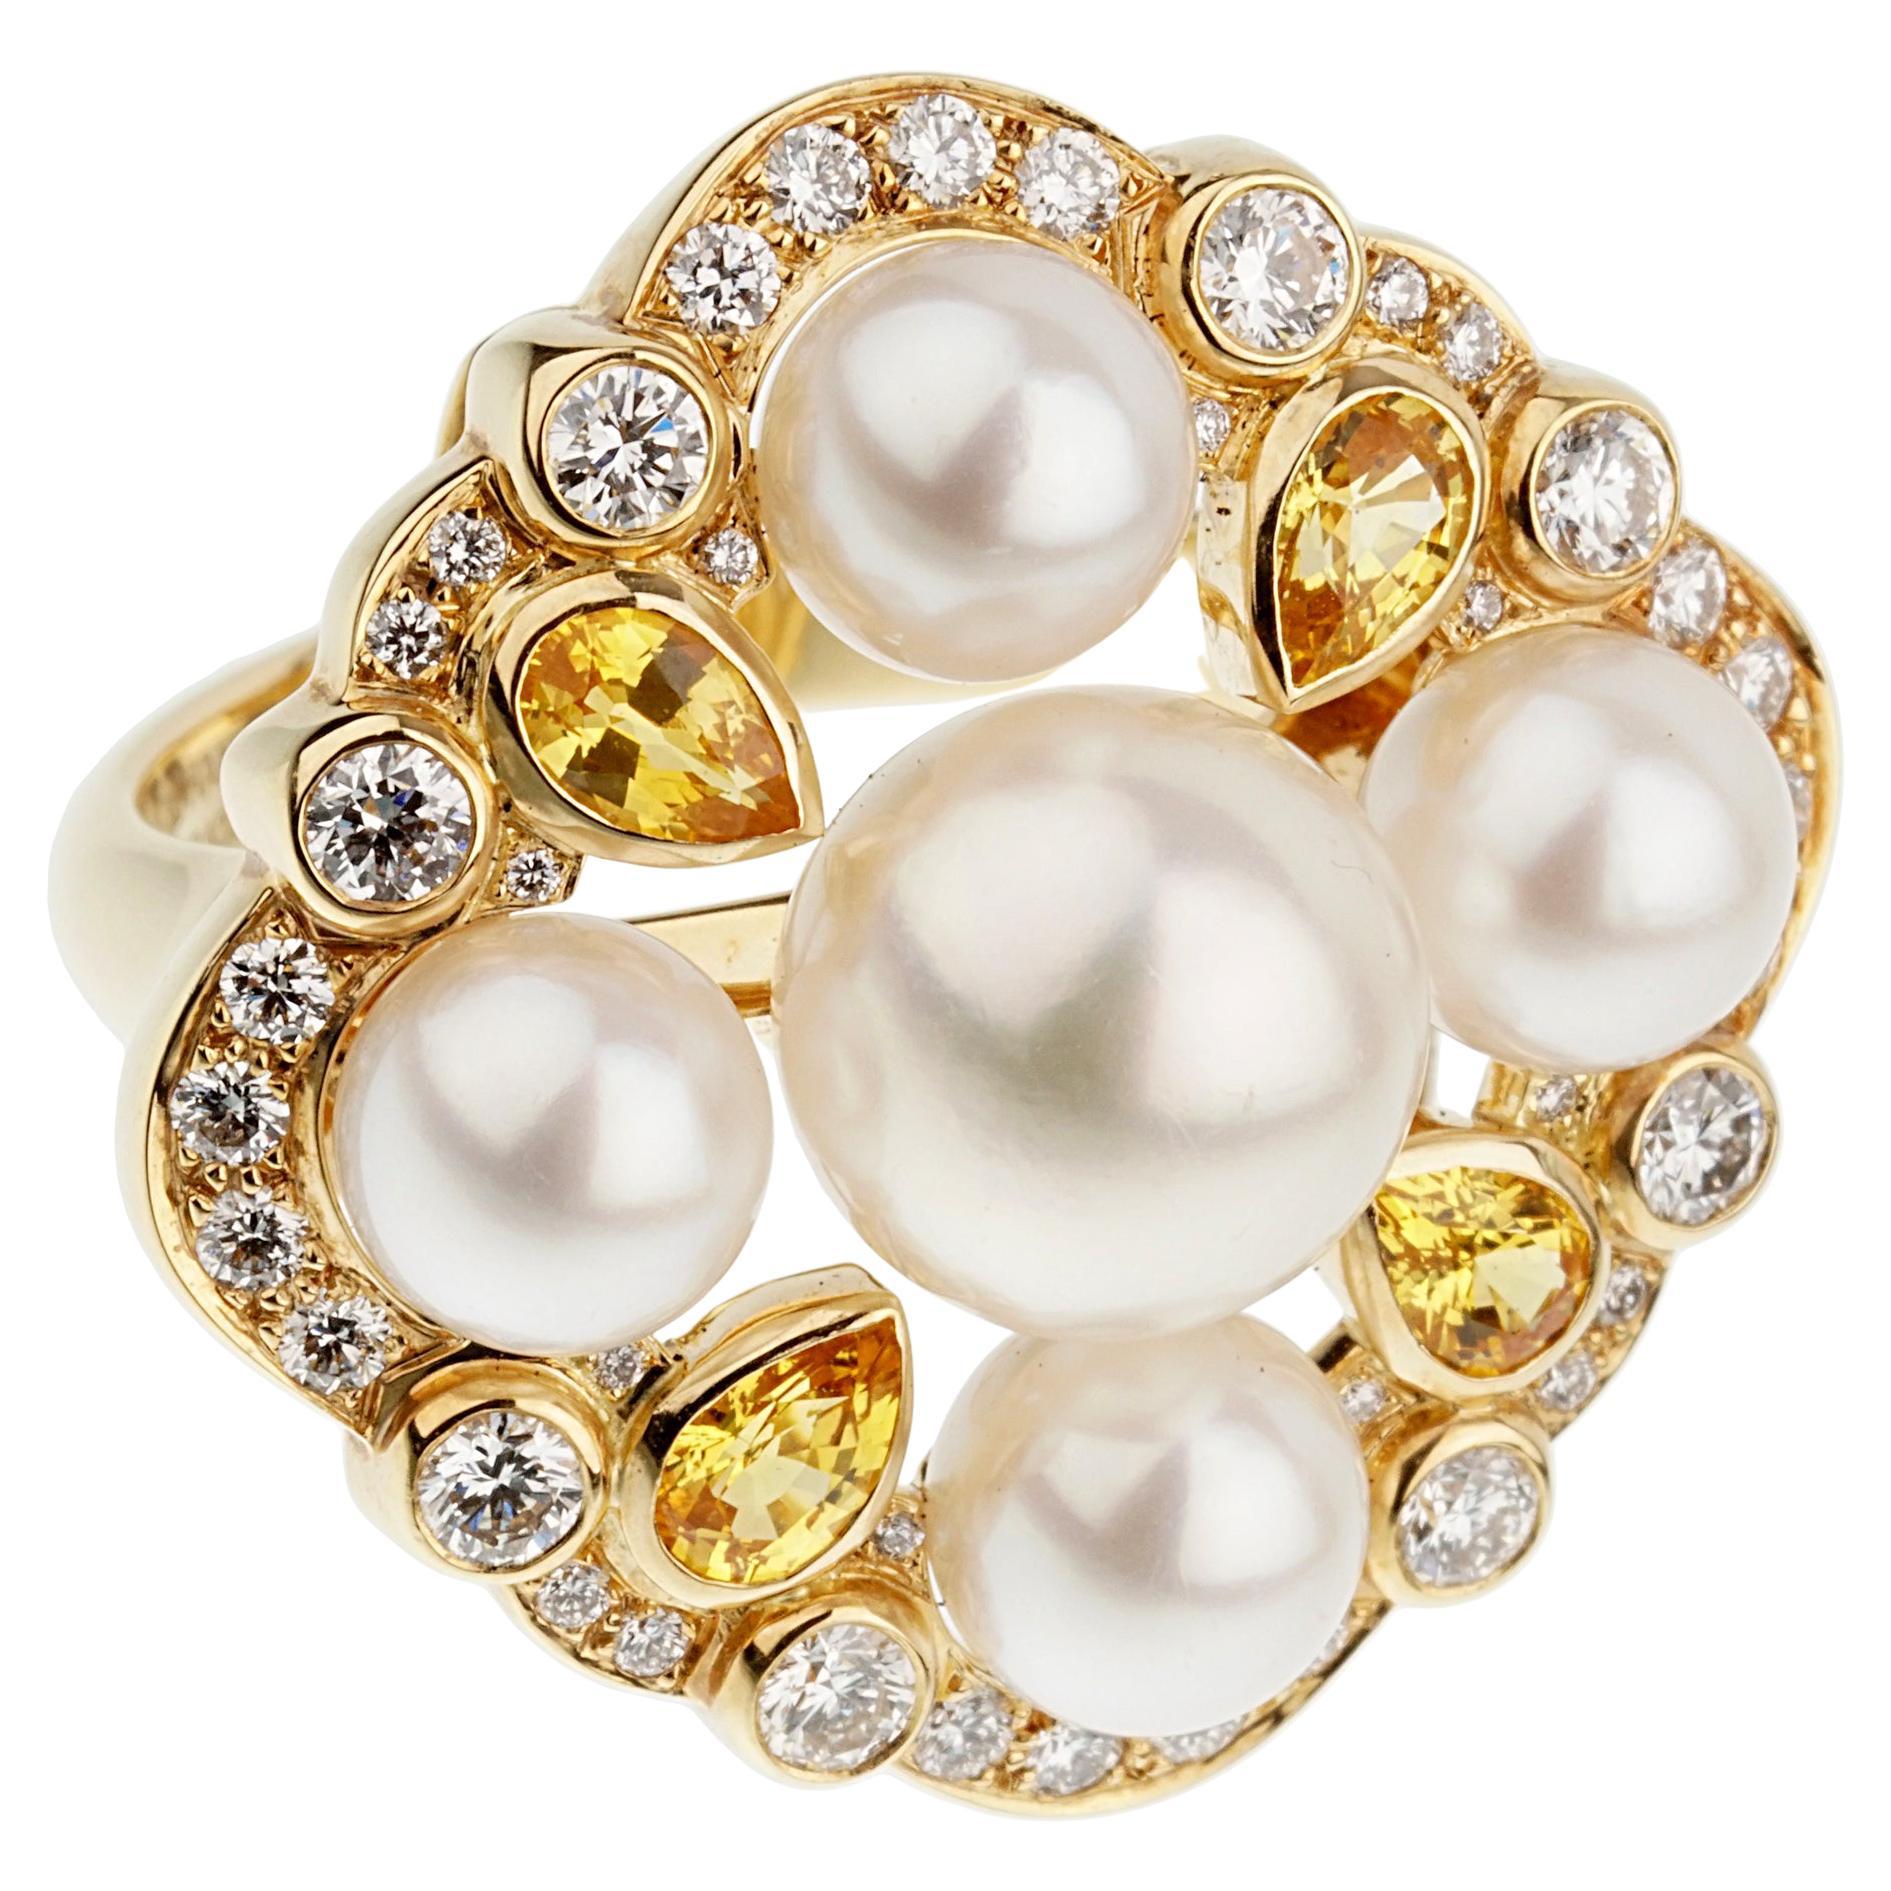 Chanel Perle Diamant Gelbgold Cocktail-Ring